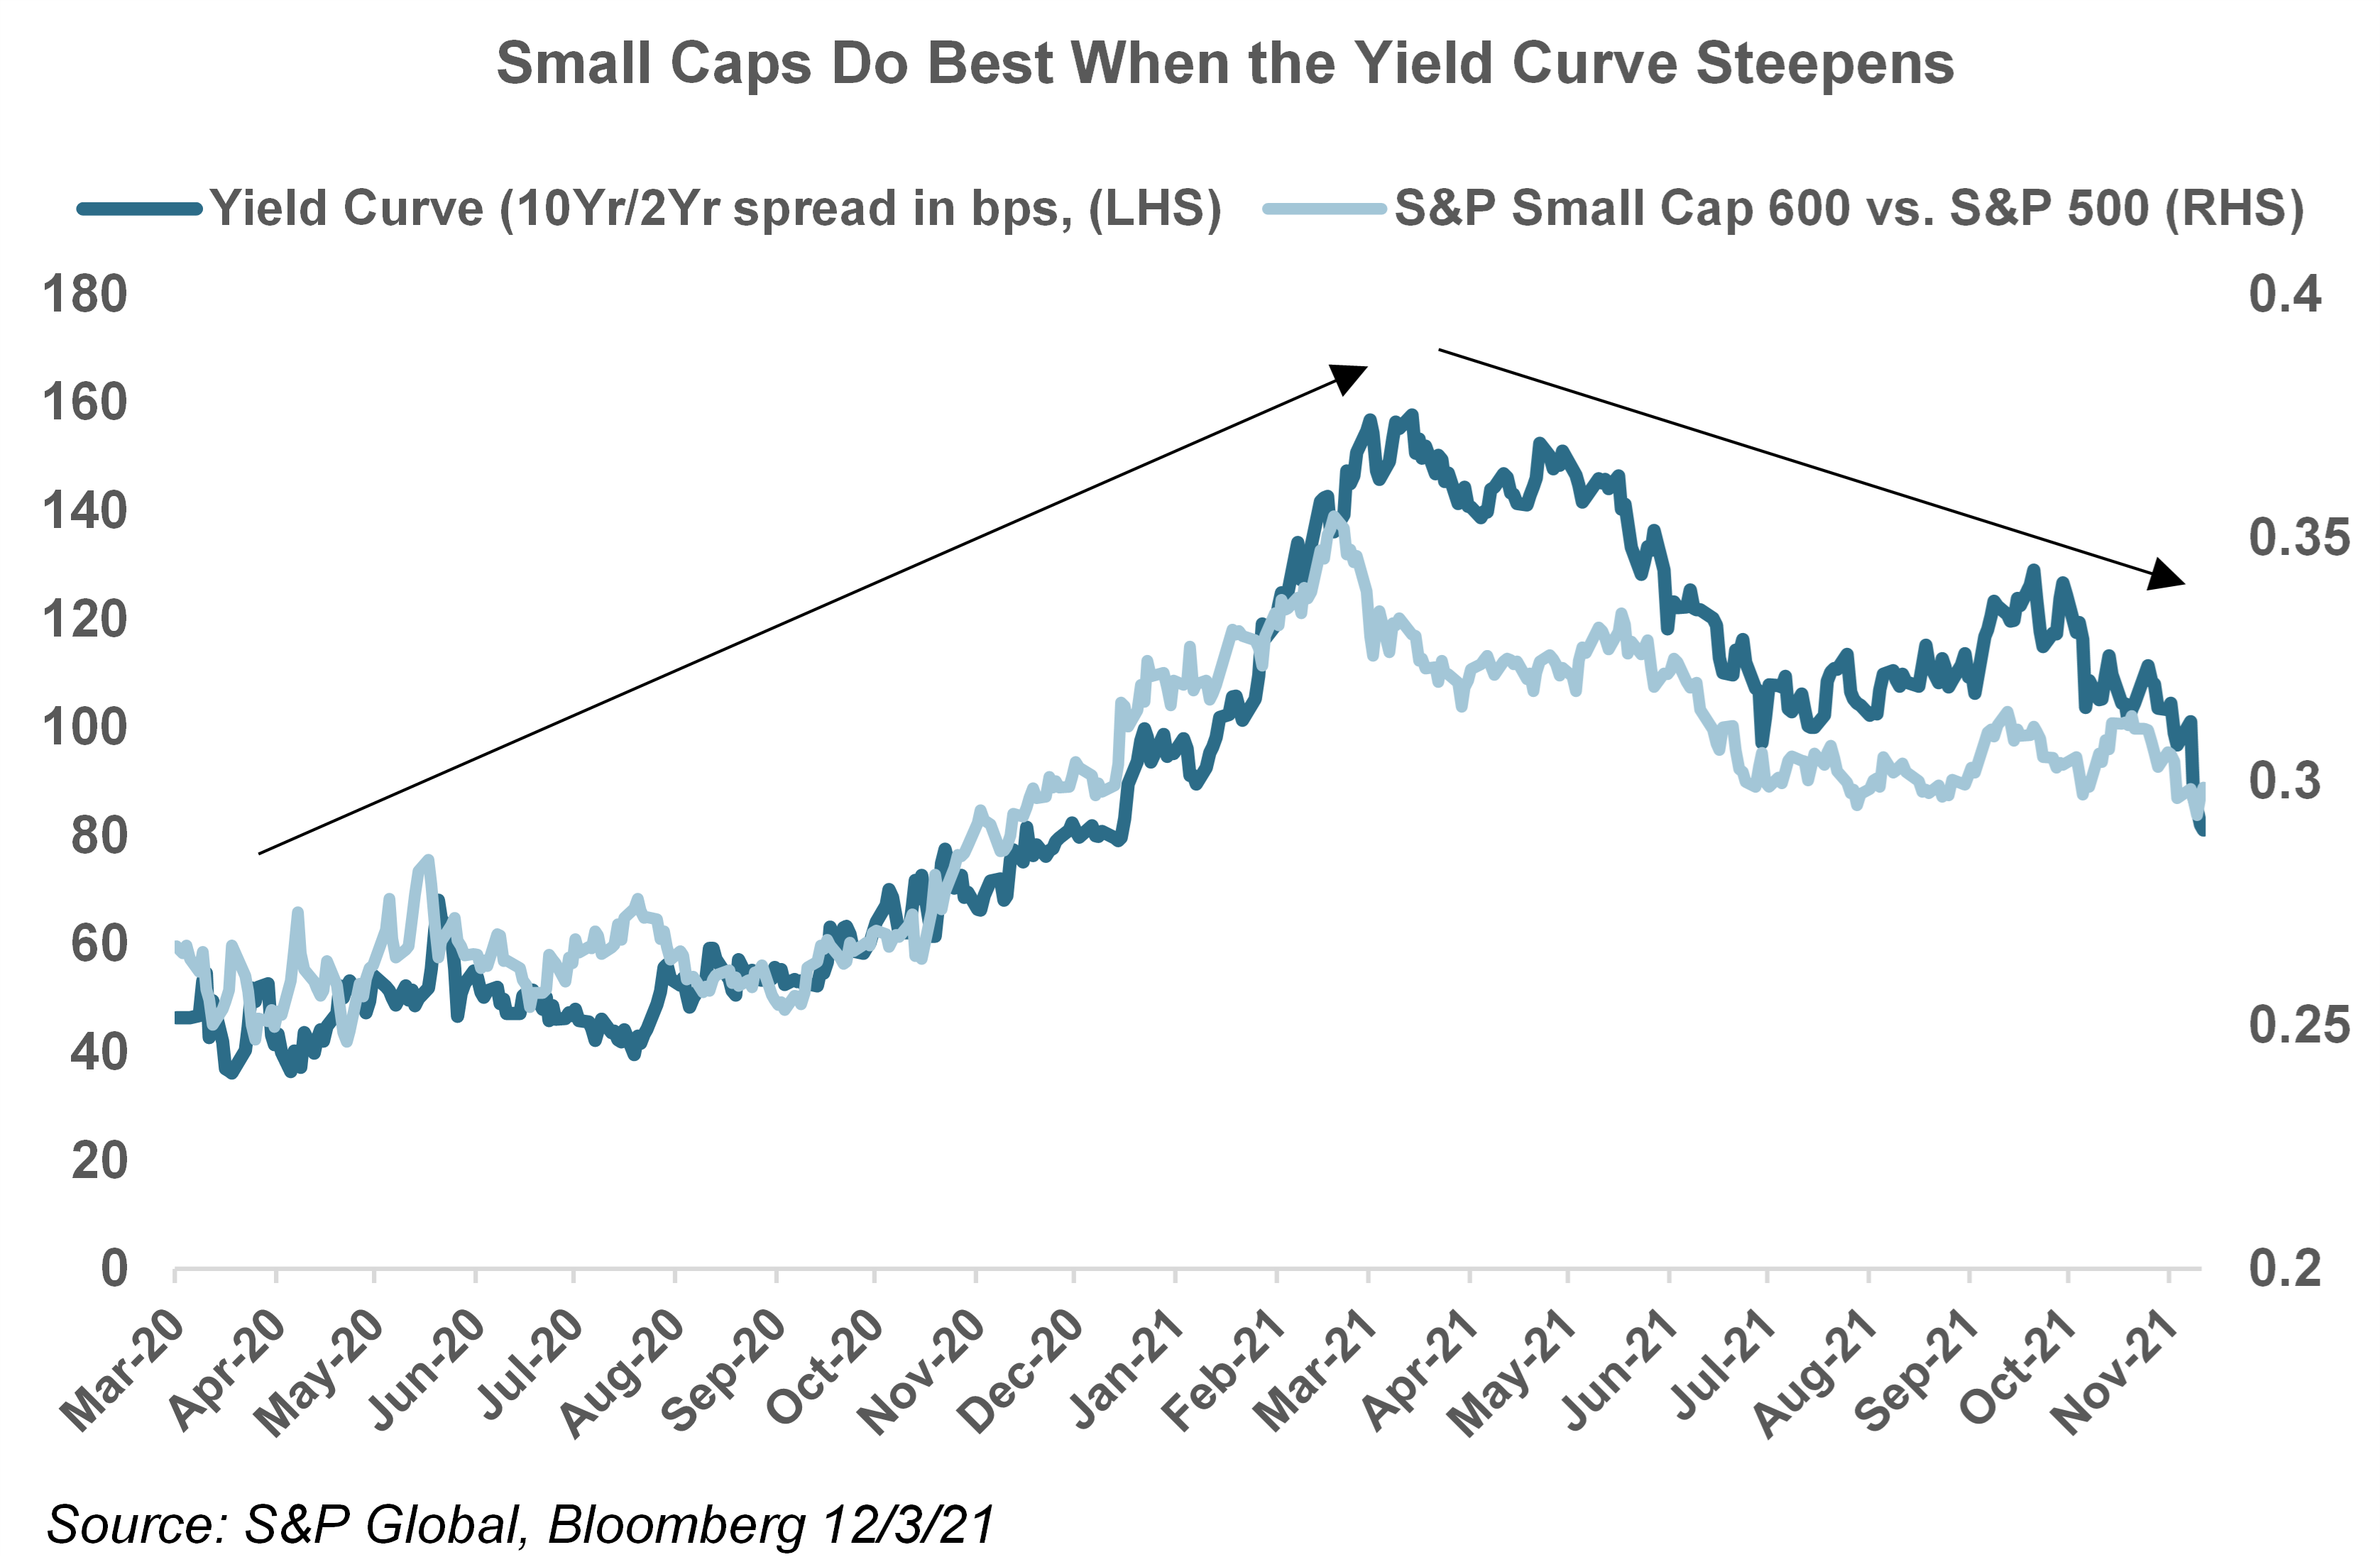 Small Caps Do Best When the Yield Curve Steepens